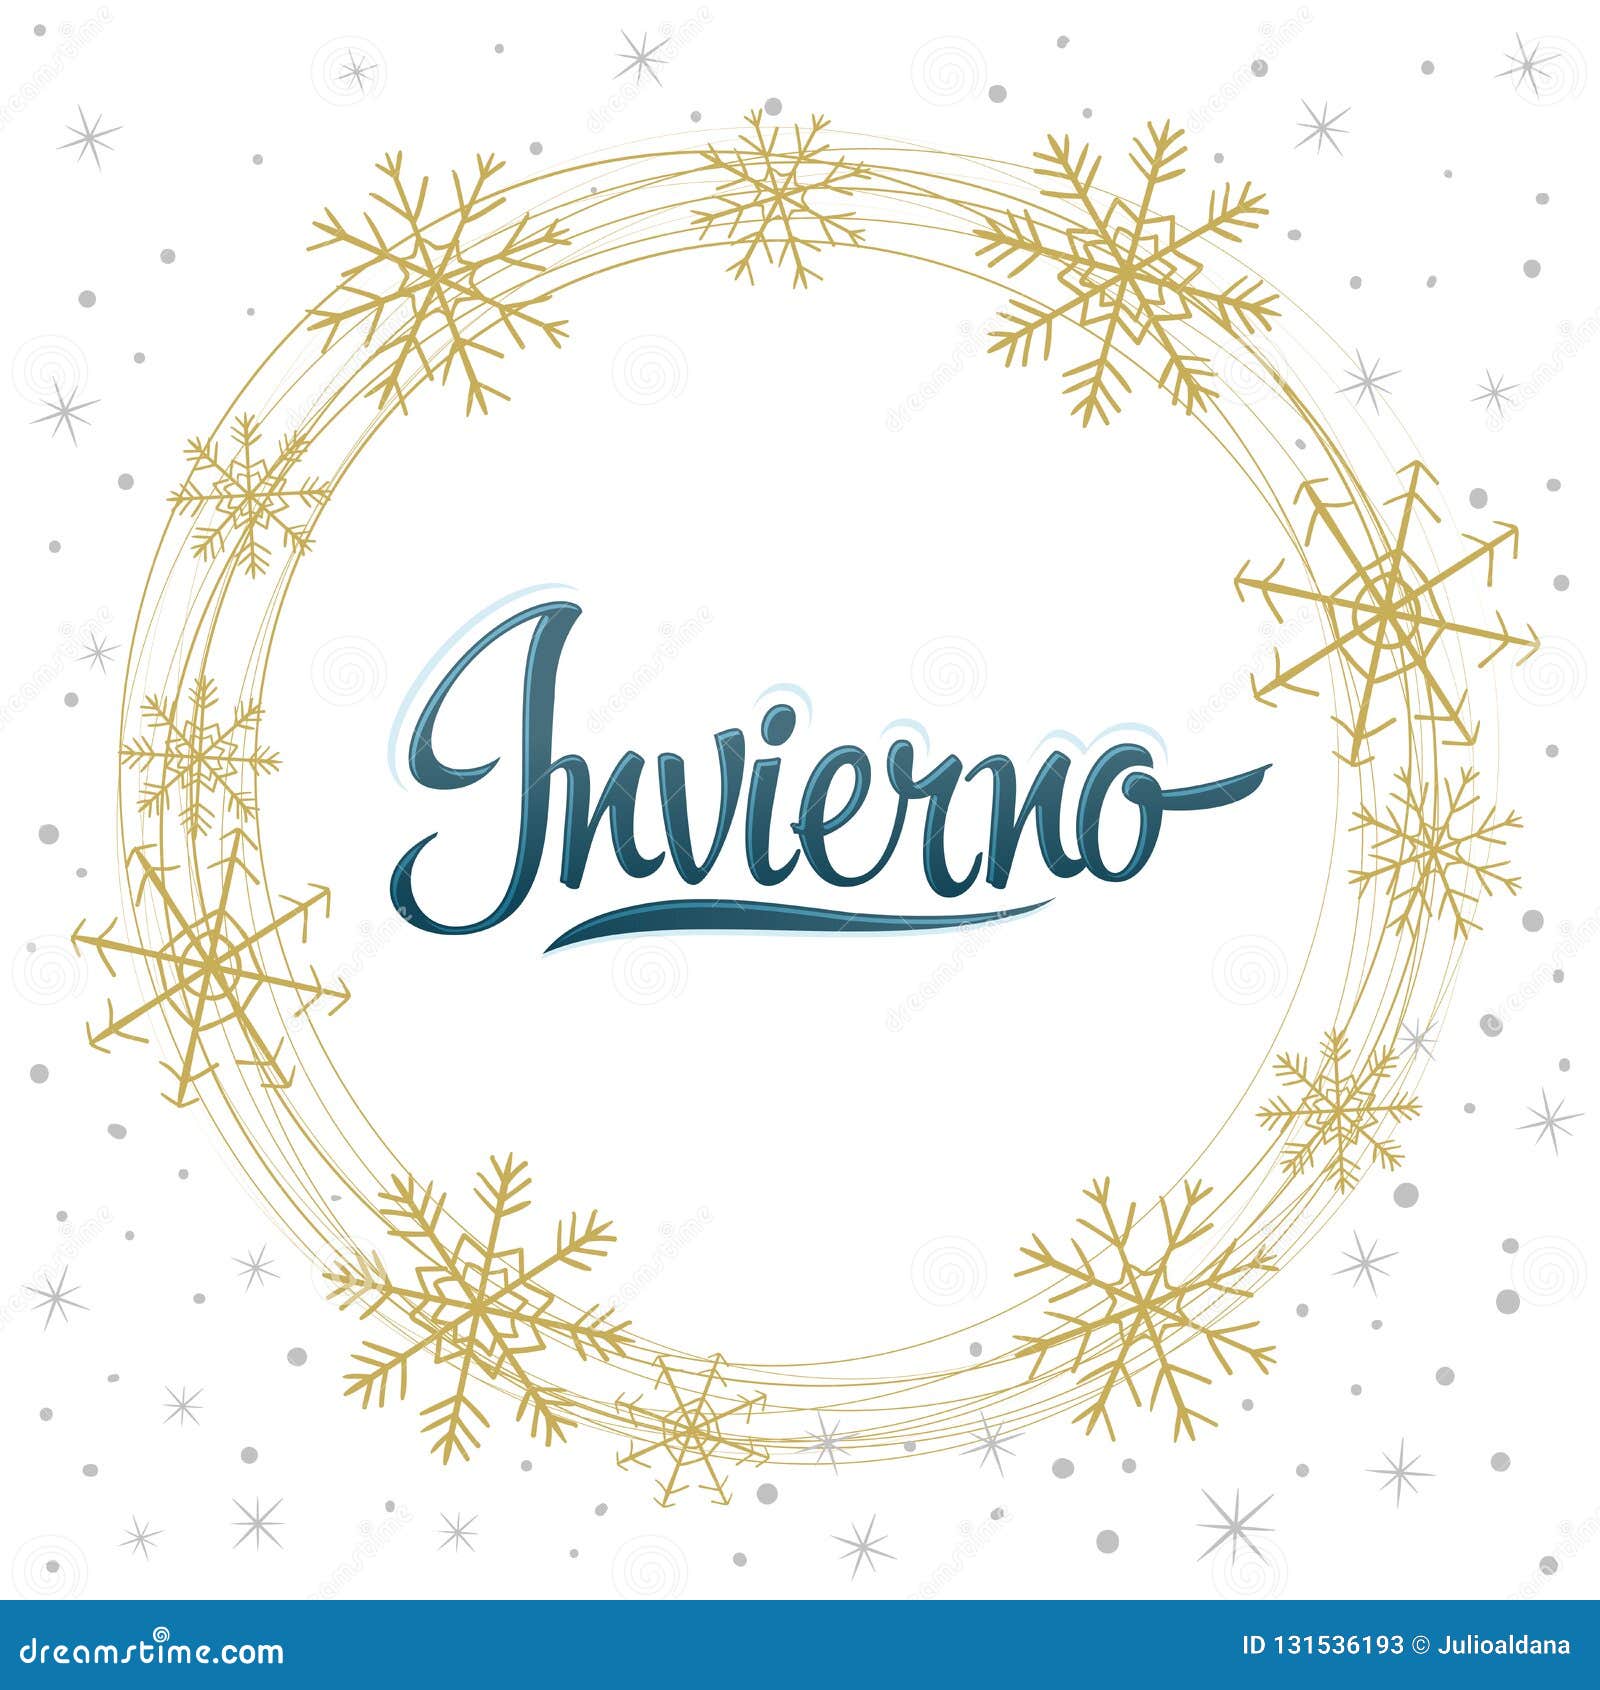 invierno, winter spanish text,  snowflake lettering 